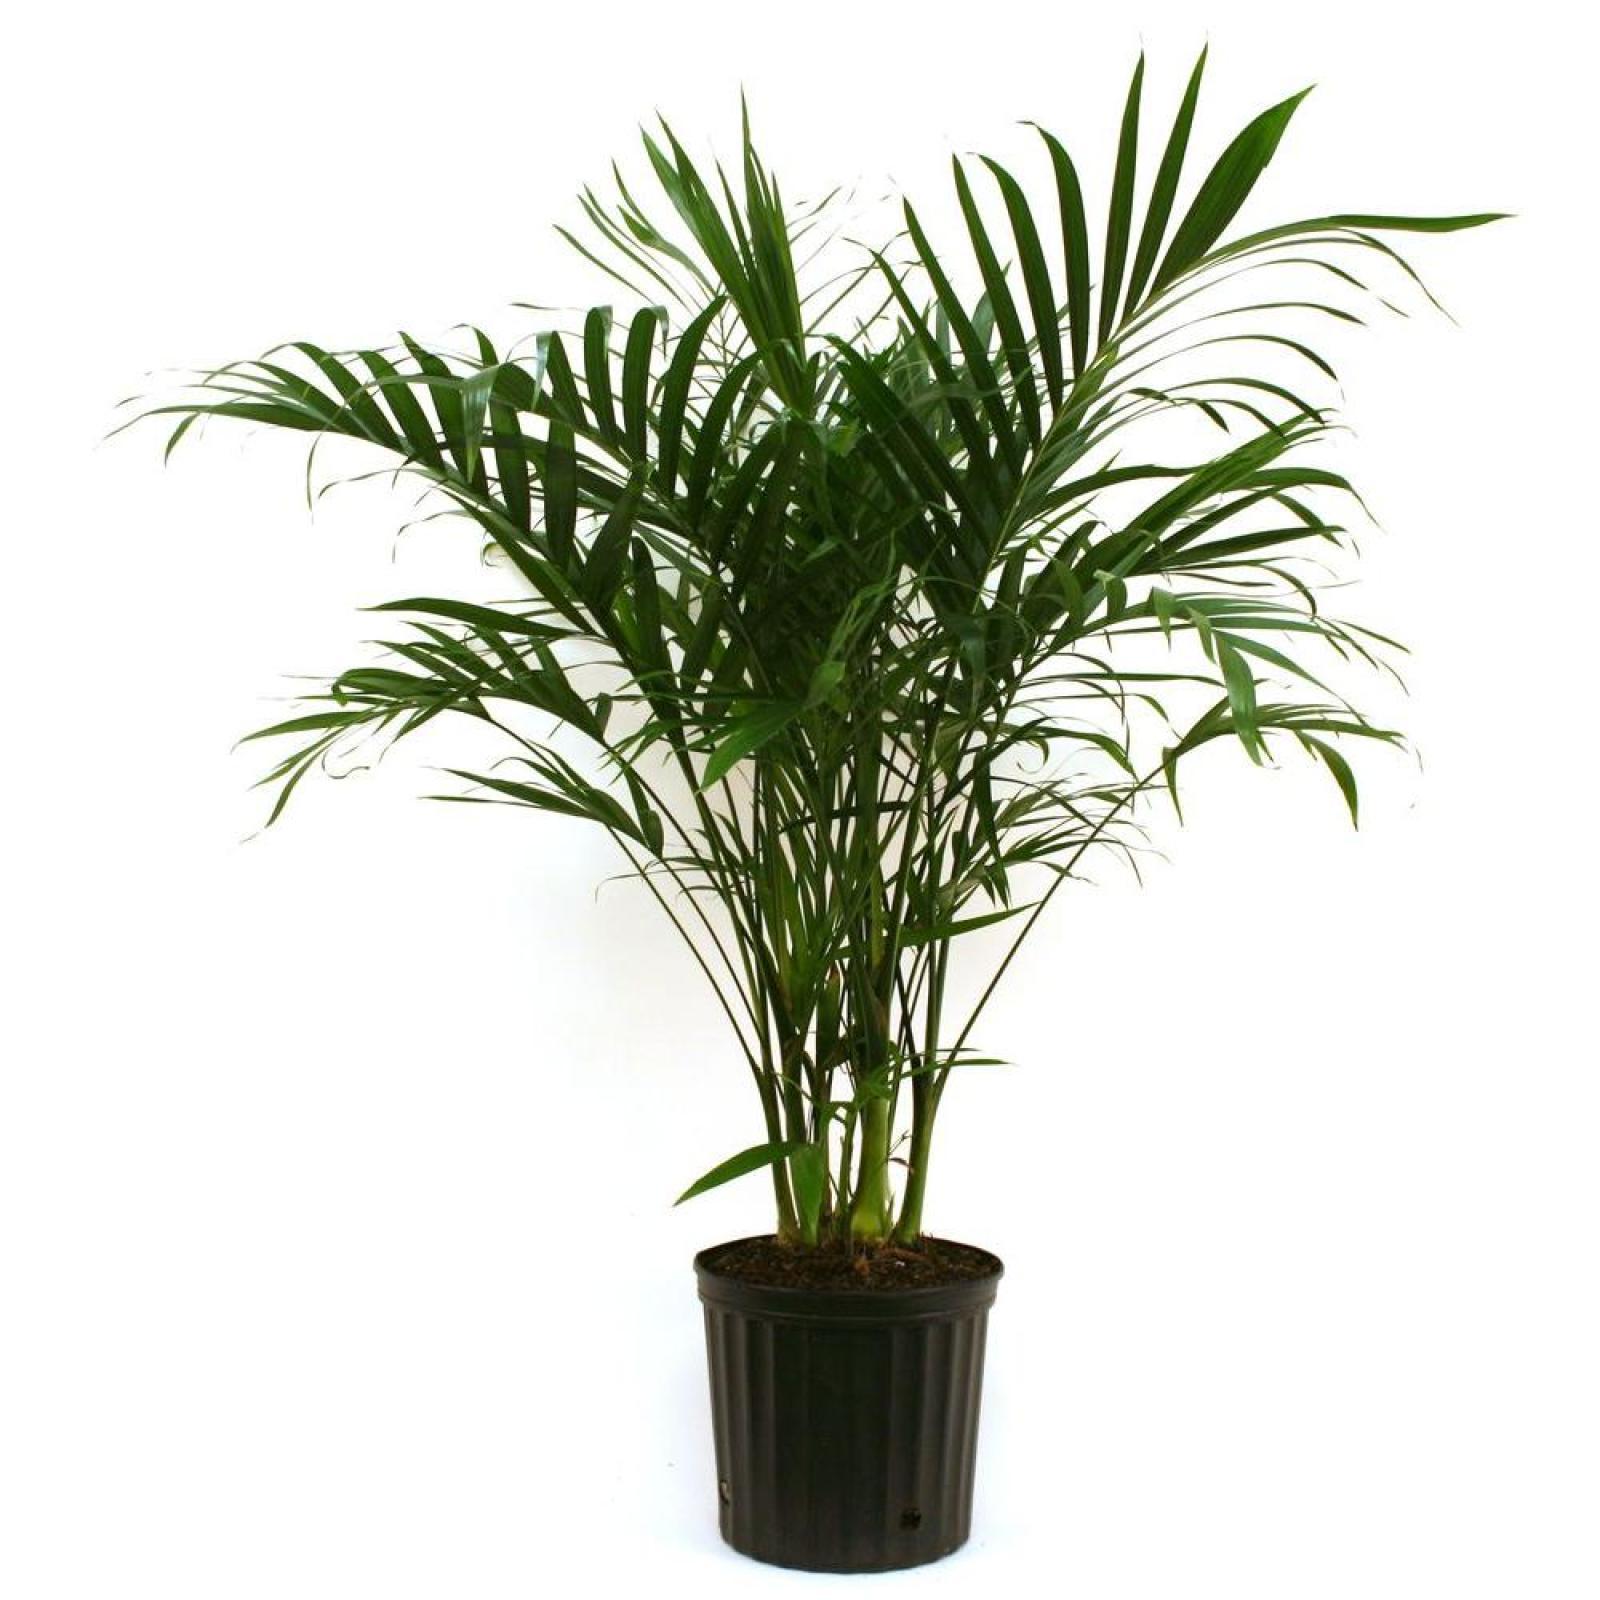 Delray Plants Cateracterum Palm in 9.25 In. Grower Pot | eBay